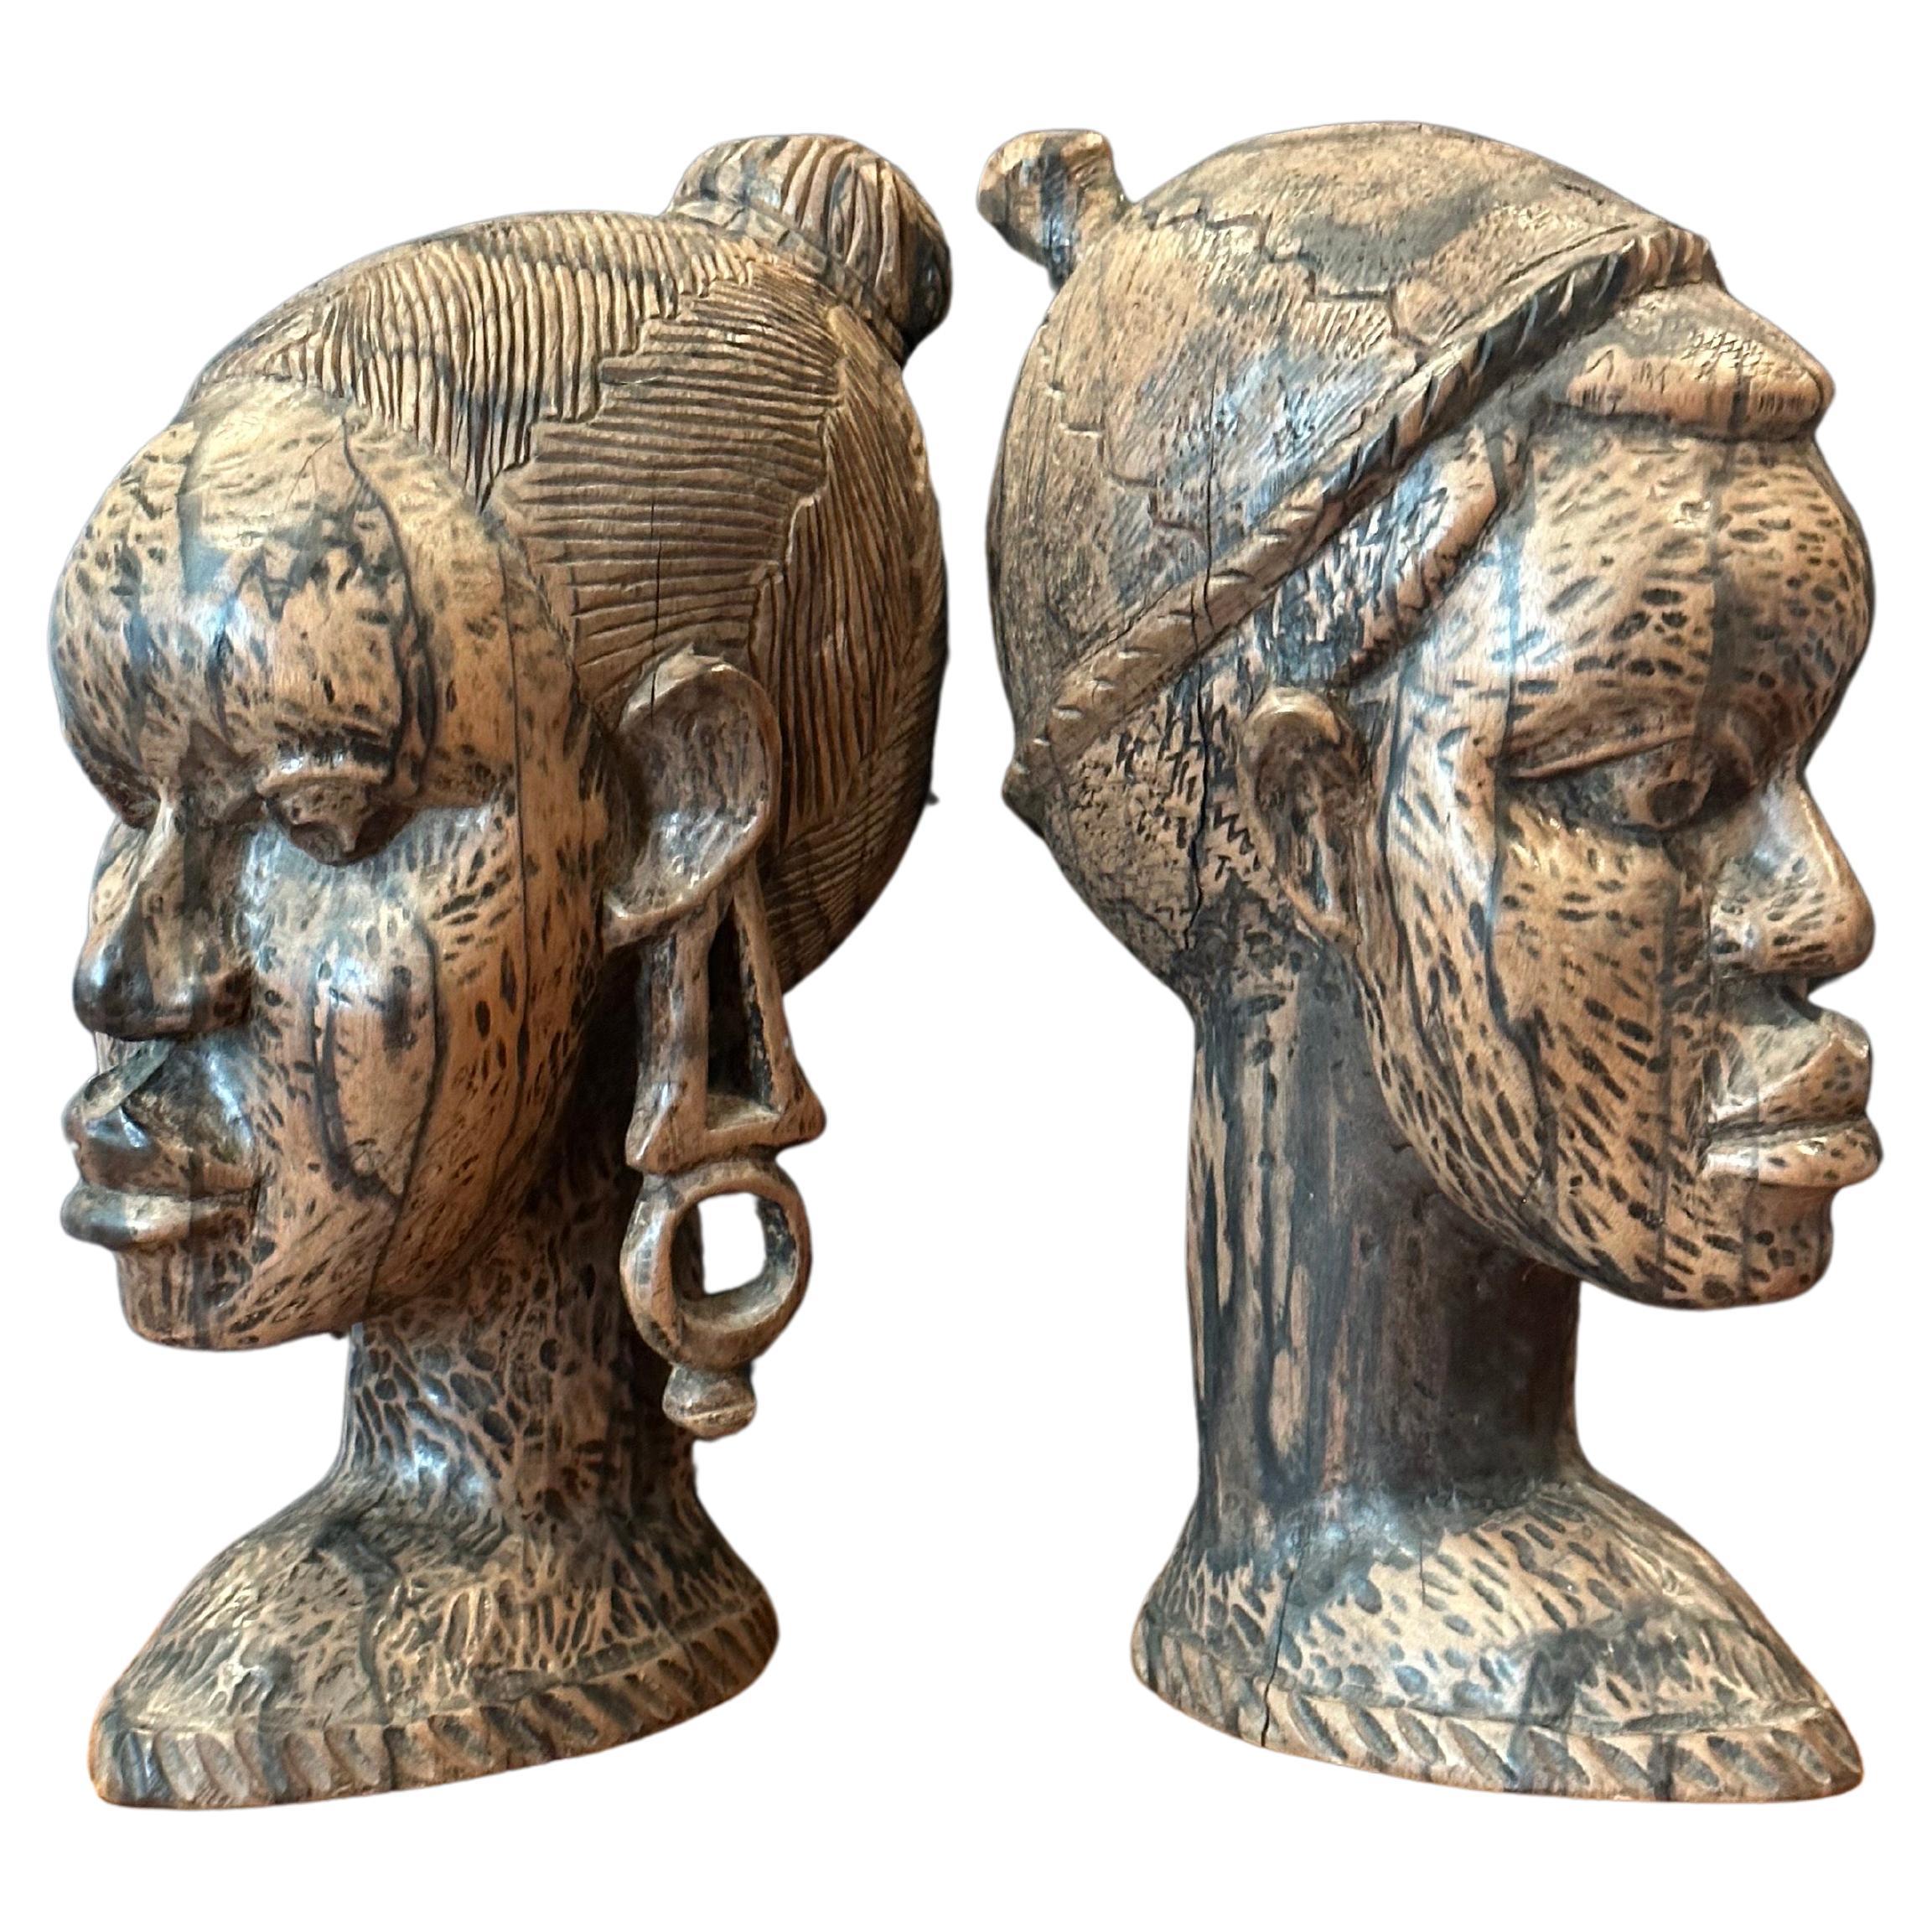 Pair of Impressive Hand-Carved Hardwood African Busts